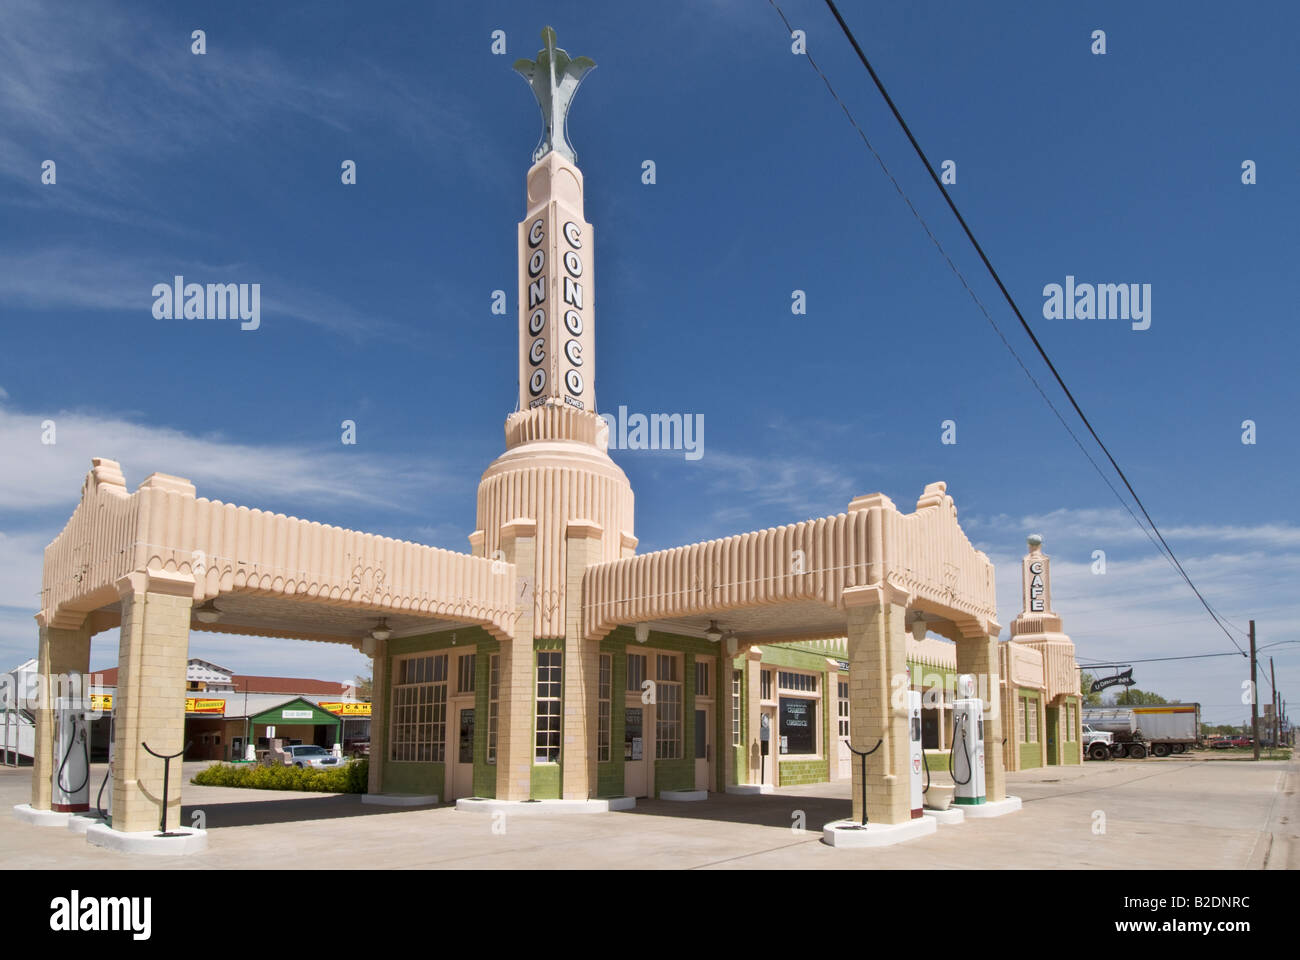 Texas Historic Old Route 66 Shamrock Tower Building U Drop Inn gas station coffee shop built 1936 in art deco style Stock Photo